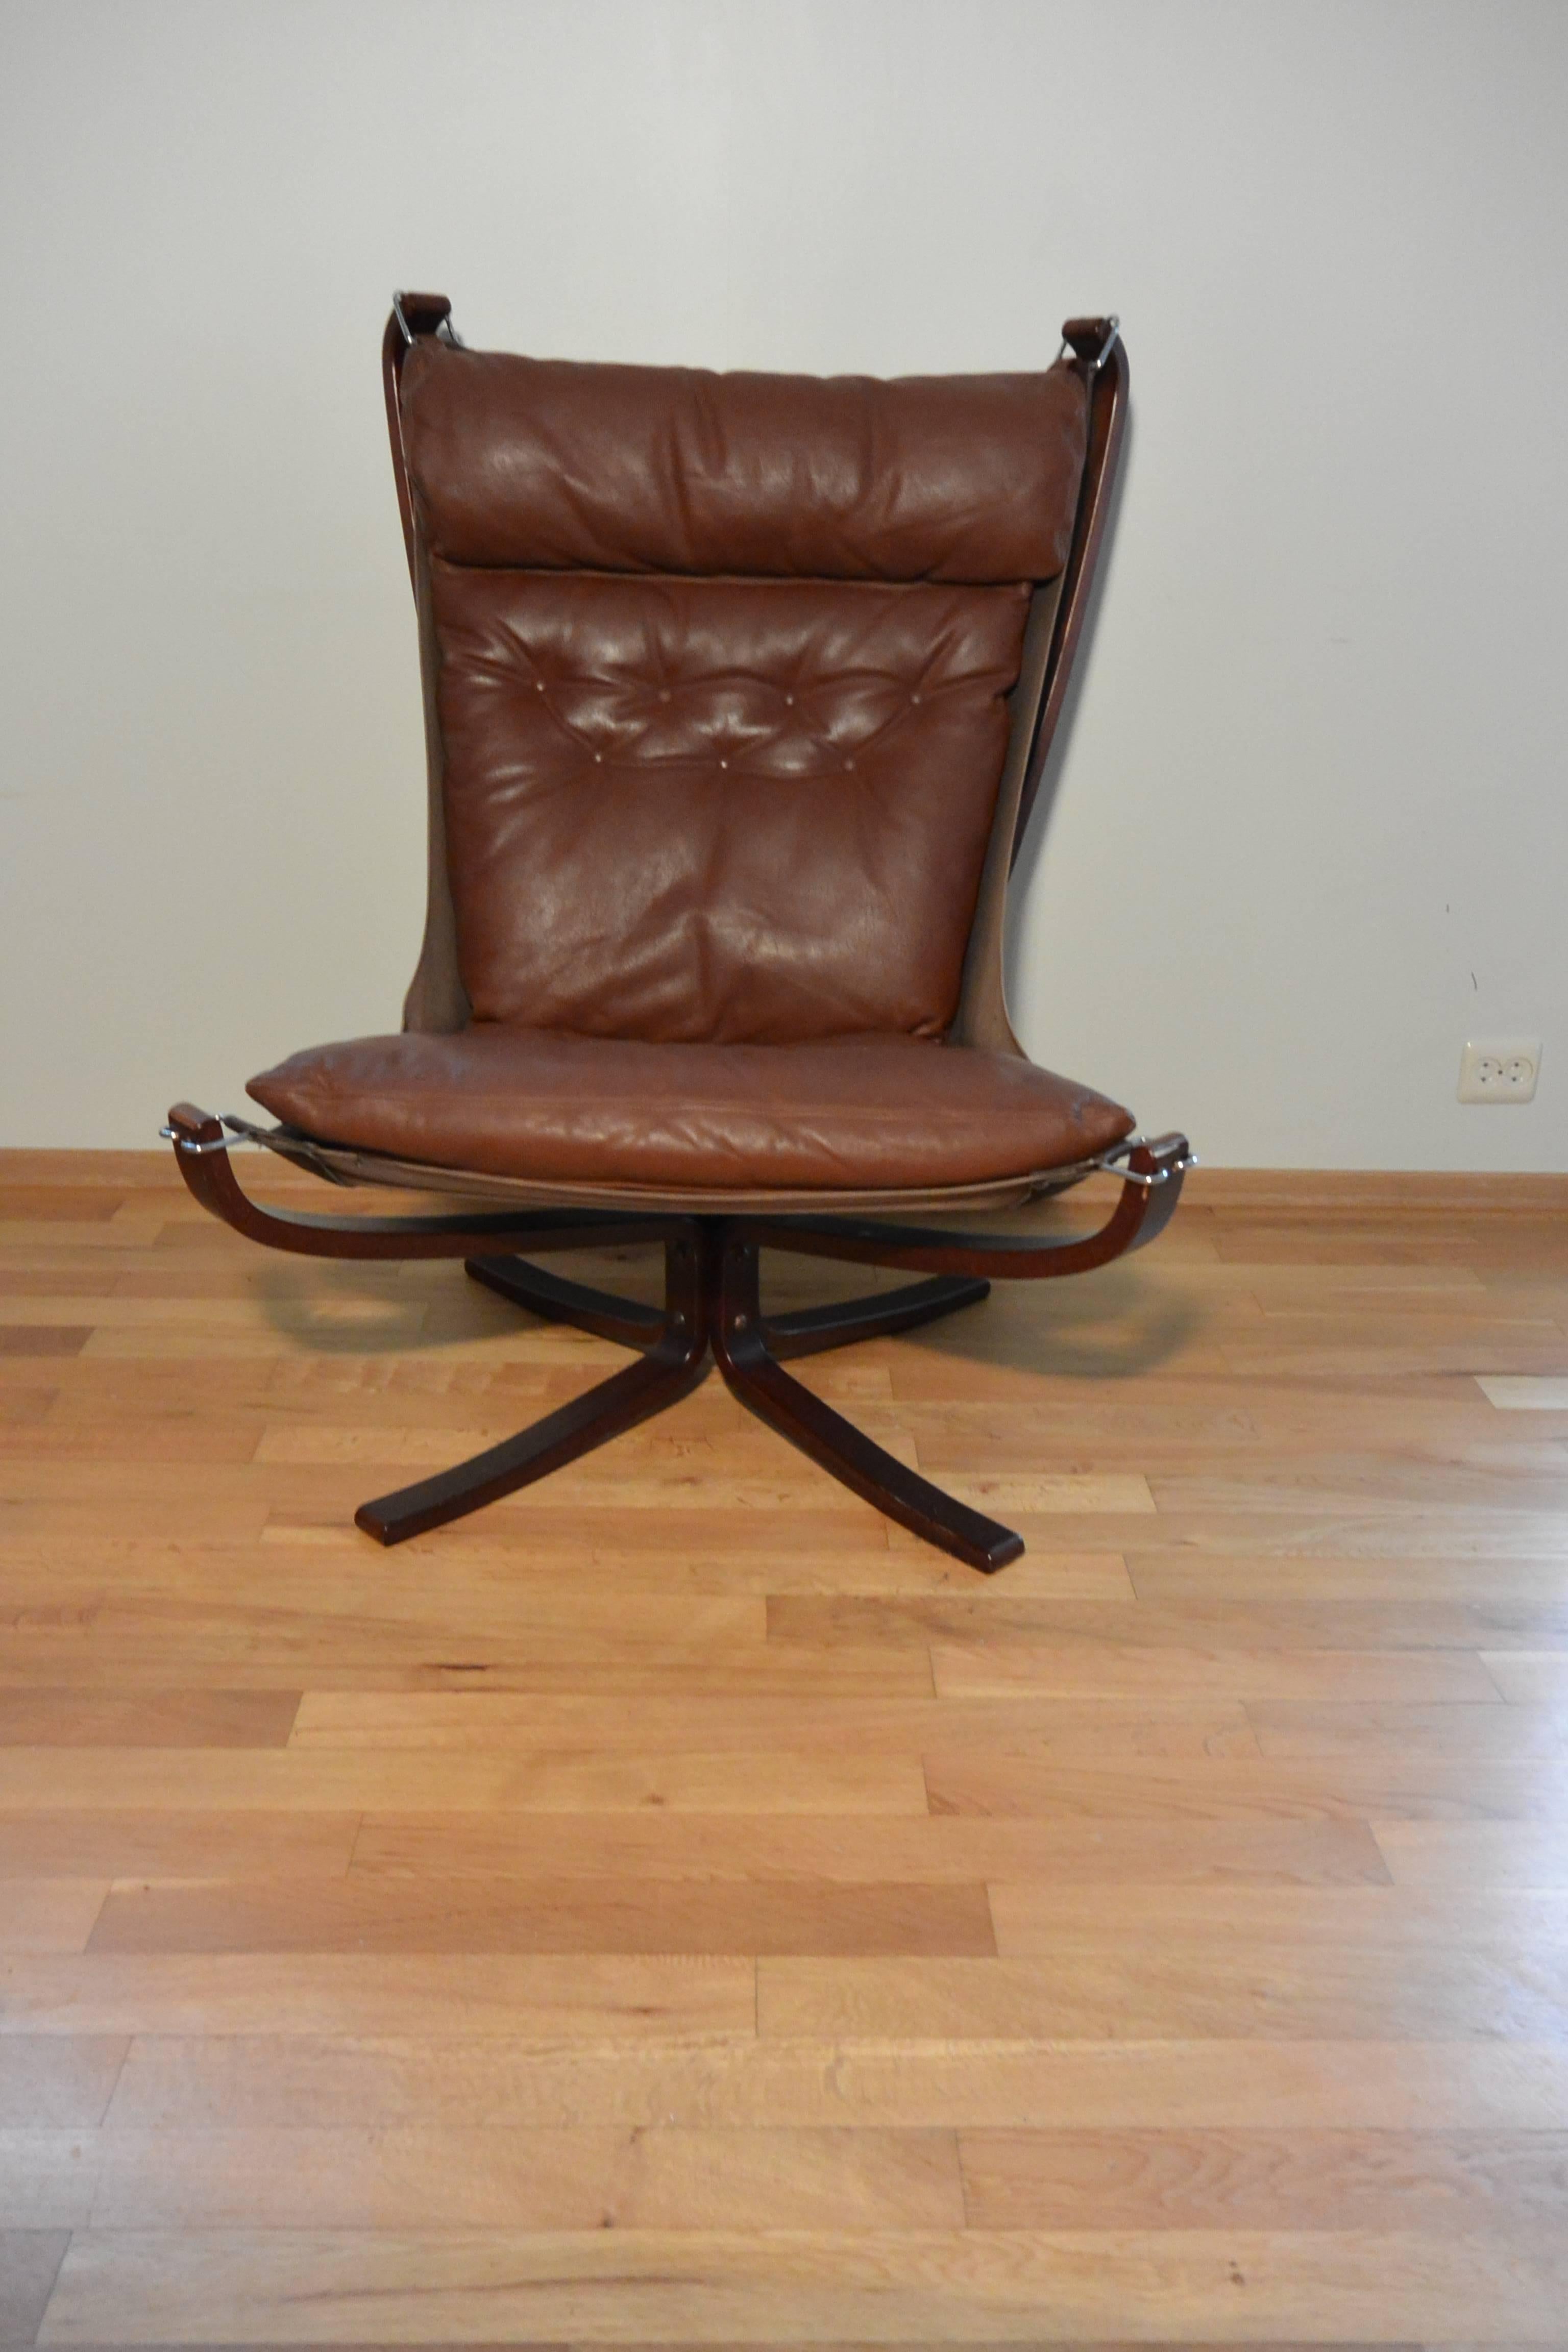 Chestnut brown high back Falcon chair. 

Based in Norway sourcing original vintage Falcon chairs. The frame is constructed from laminated bentwood / laminated rosewood and is bolted to a steel rectangular tube creating a study base. Easily